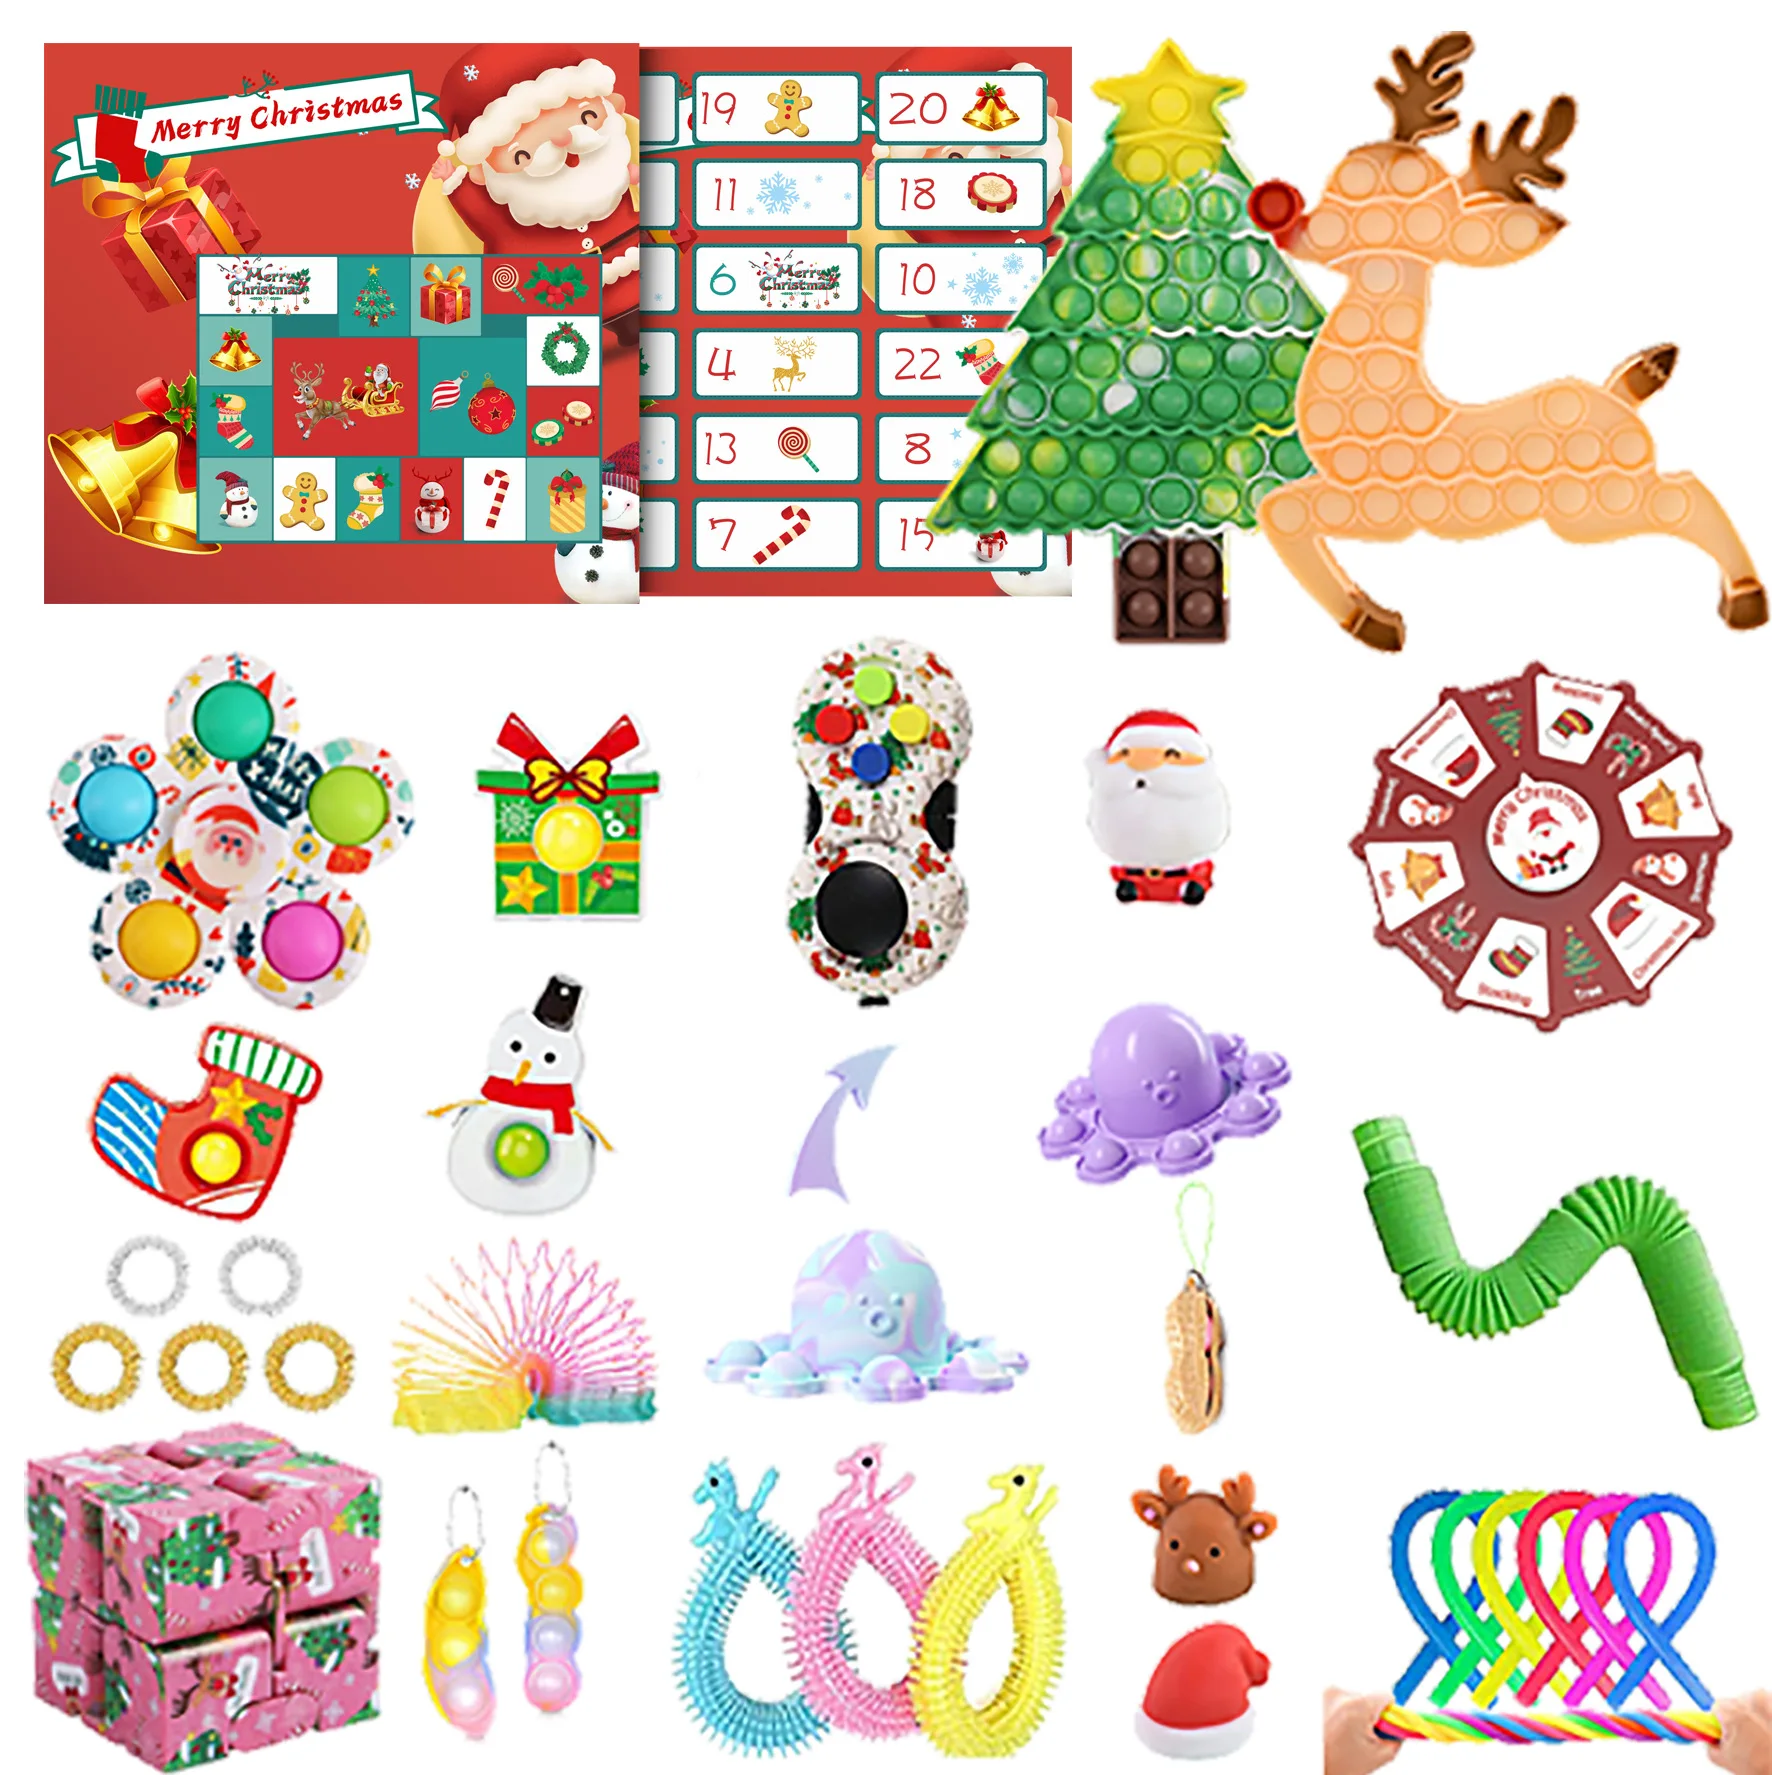 idget Toys 24 Days Christmas Advent Calendar Pack Anti Stress Toys Kit  Stress Relief Figet Toy Blind Box Kids Christmas Gift